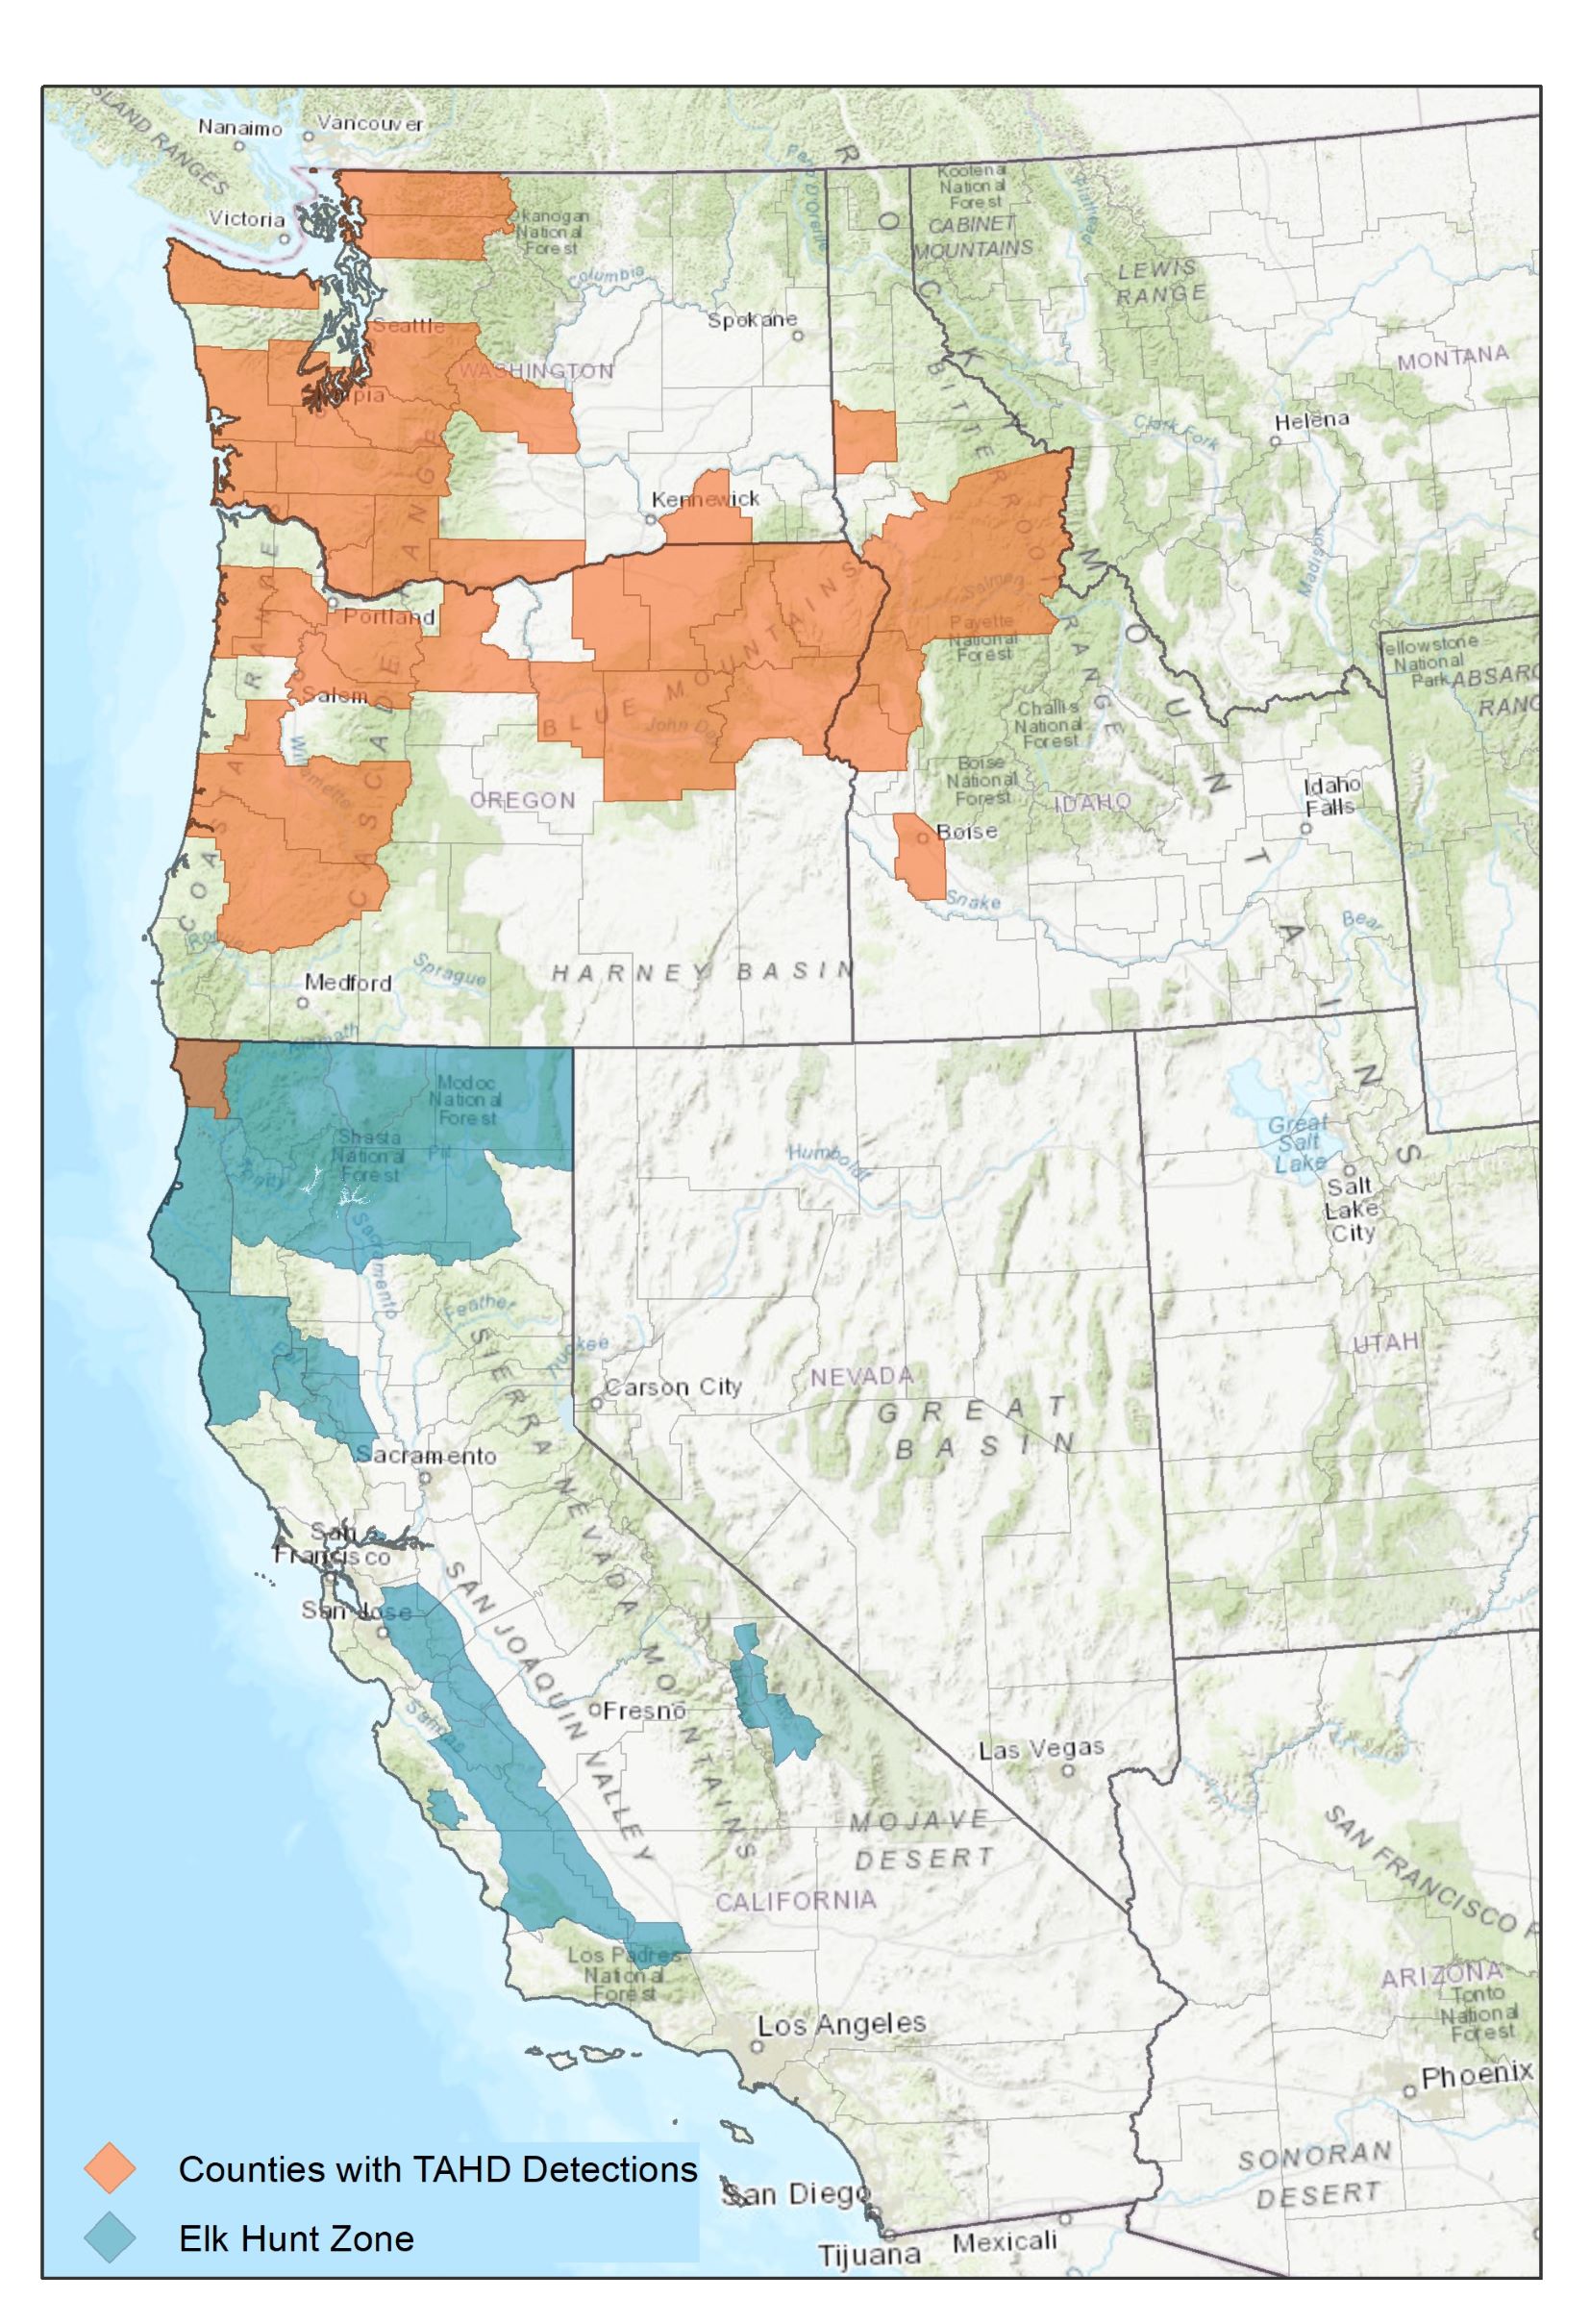 Map of counties (shown in orange) in Washington, Idaho, Oregon, and California where TAHD has been detected in elk. Distributions of elk in California are mainly in the far north and the coastal mountain range